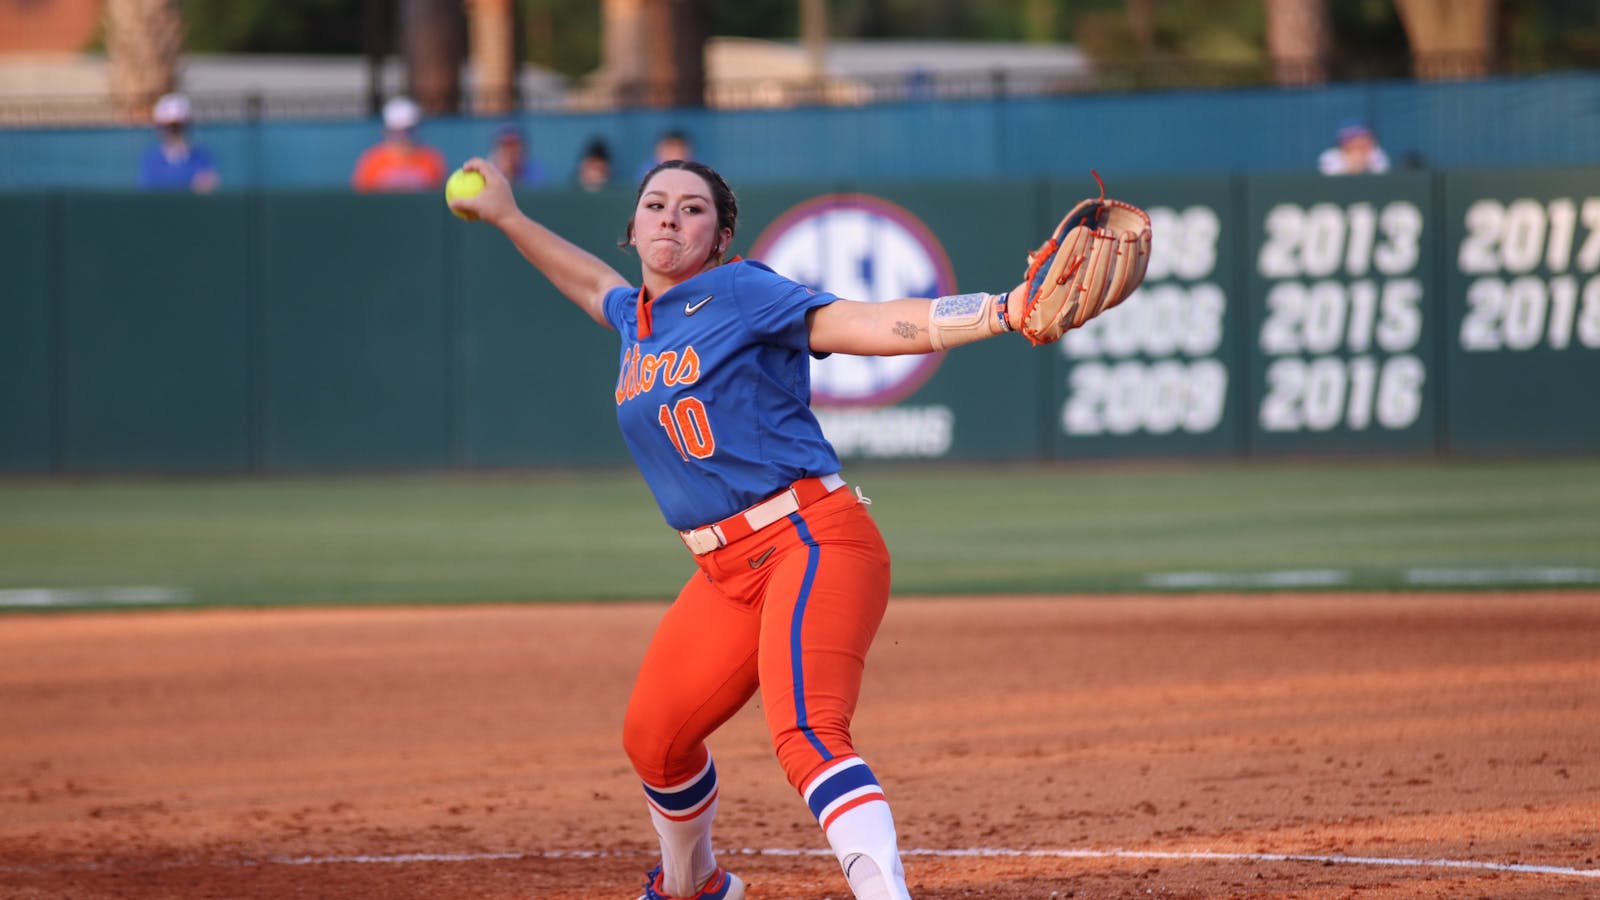 Florida softball hopes to return after disappointing 2021 season